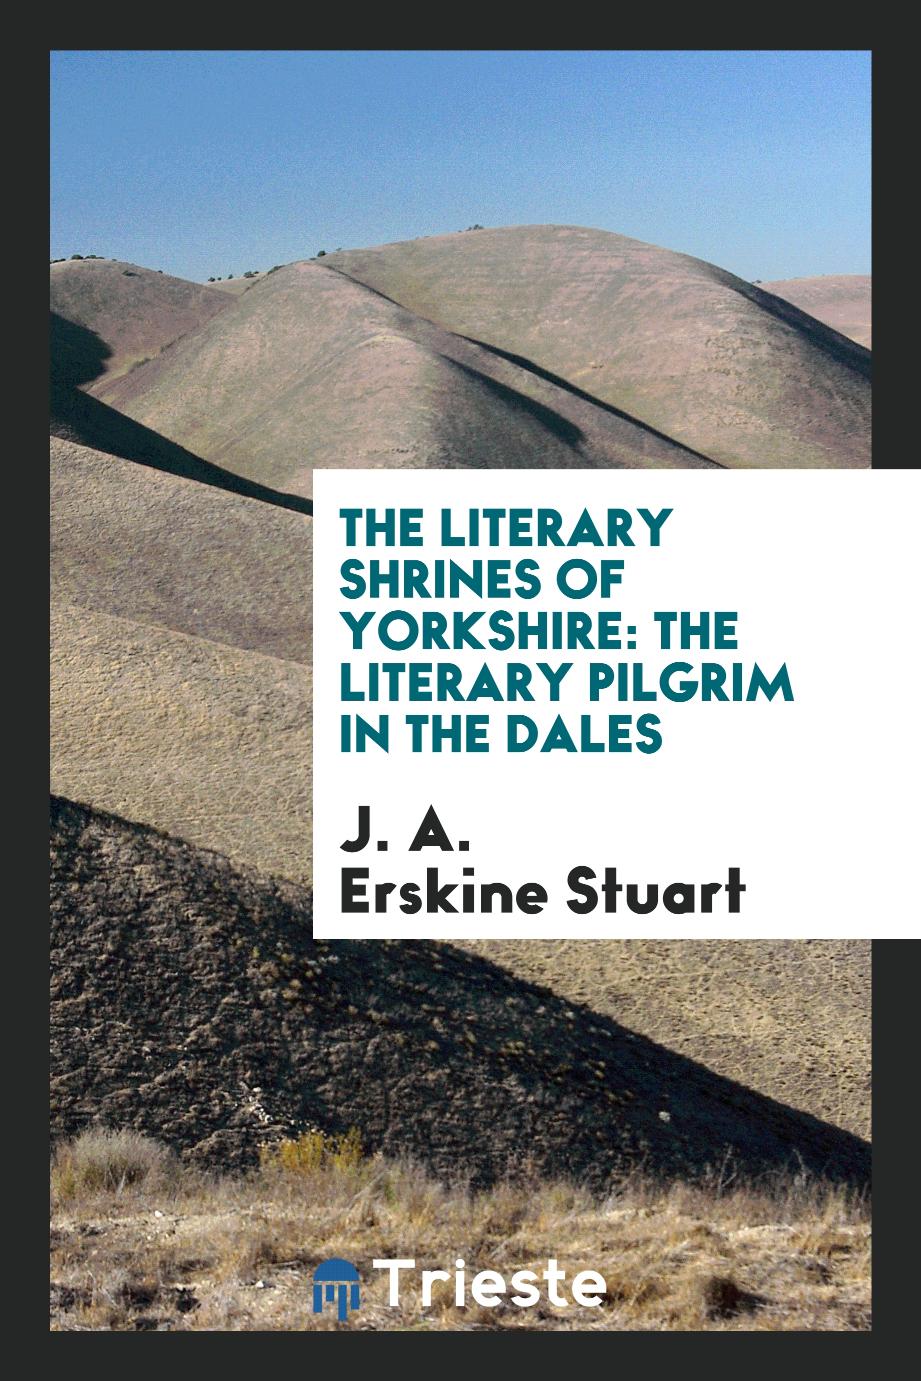 The Literary Shrines of Yorkshire: The Literary Pilgrim in the Dales